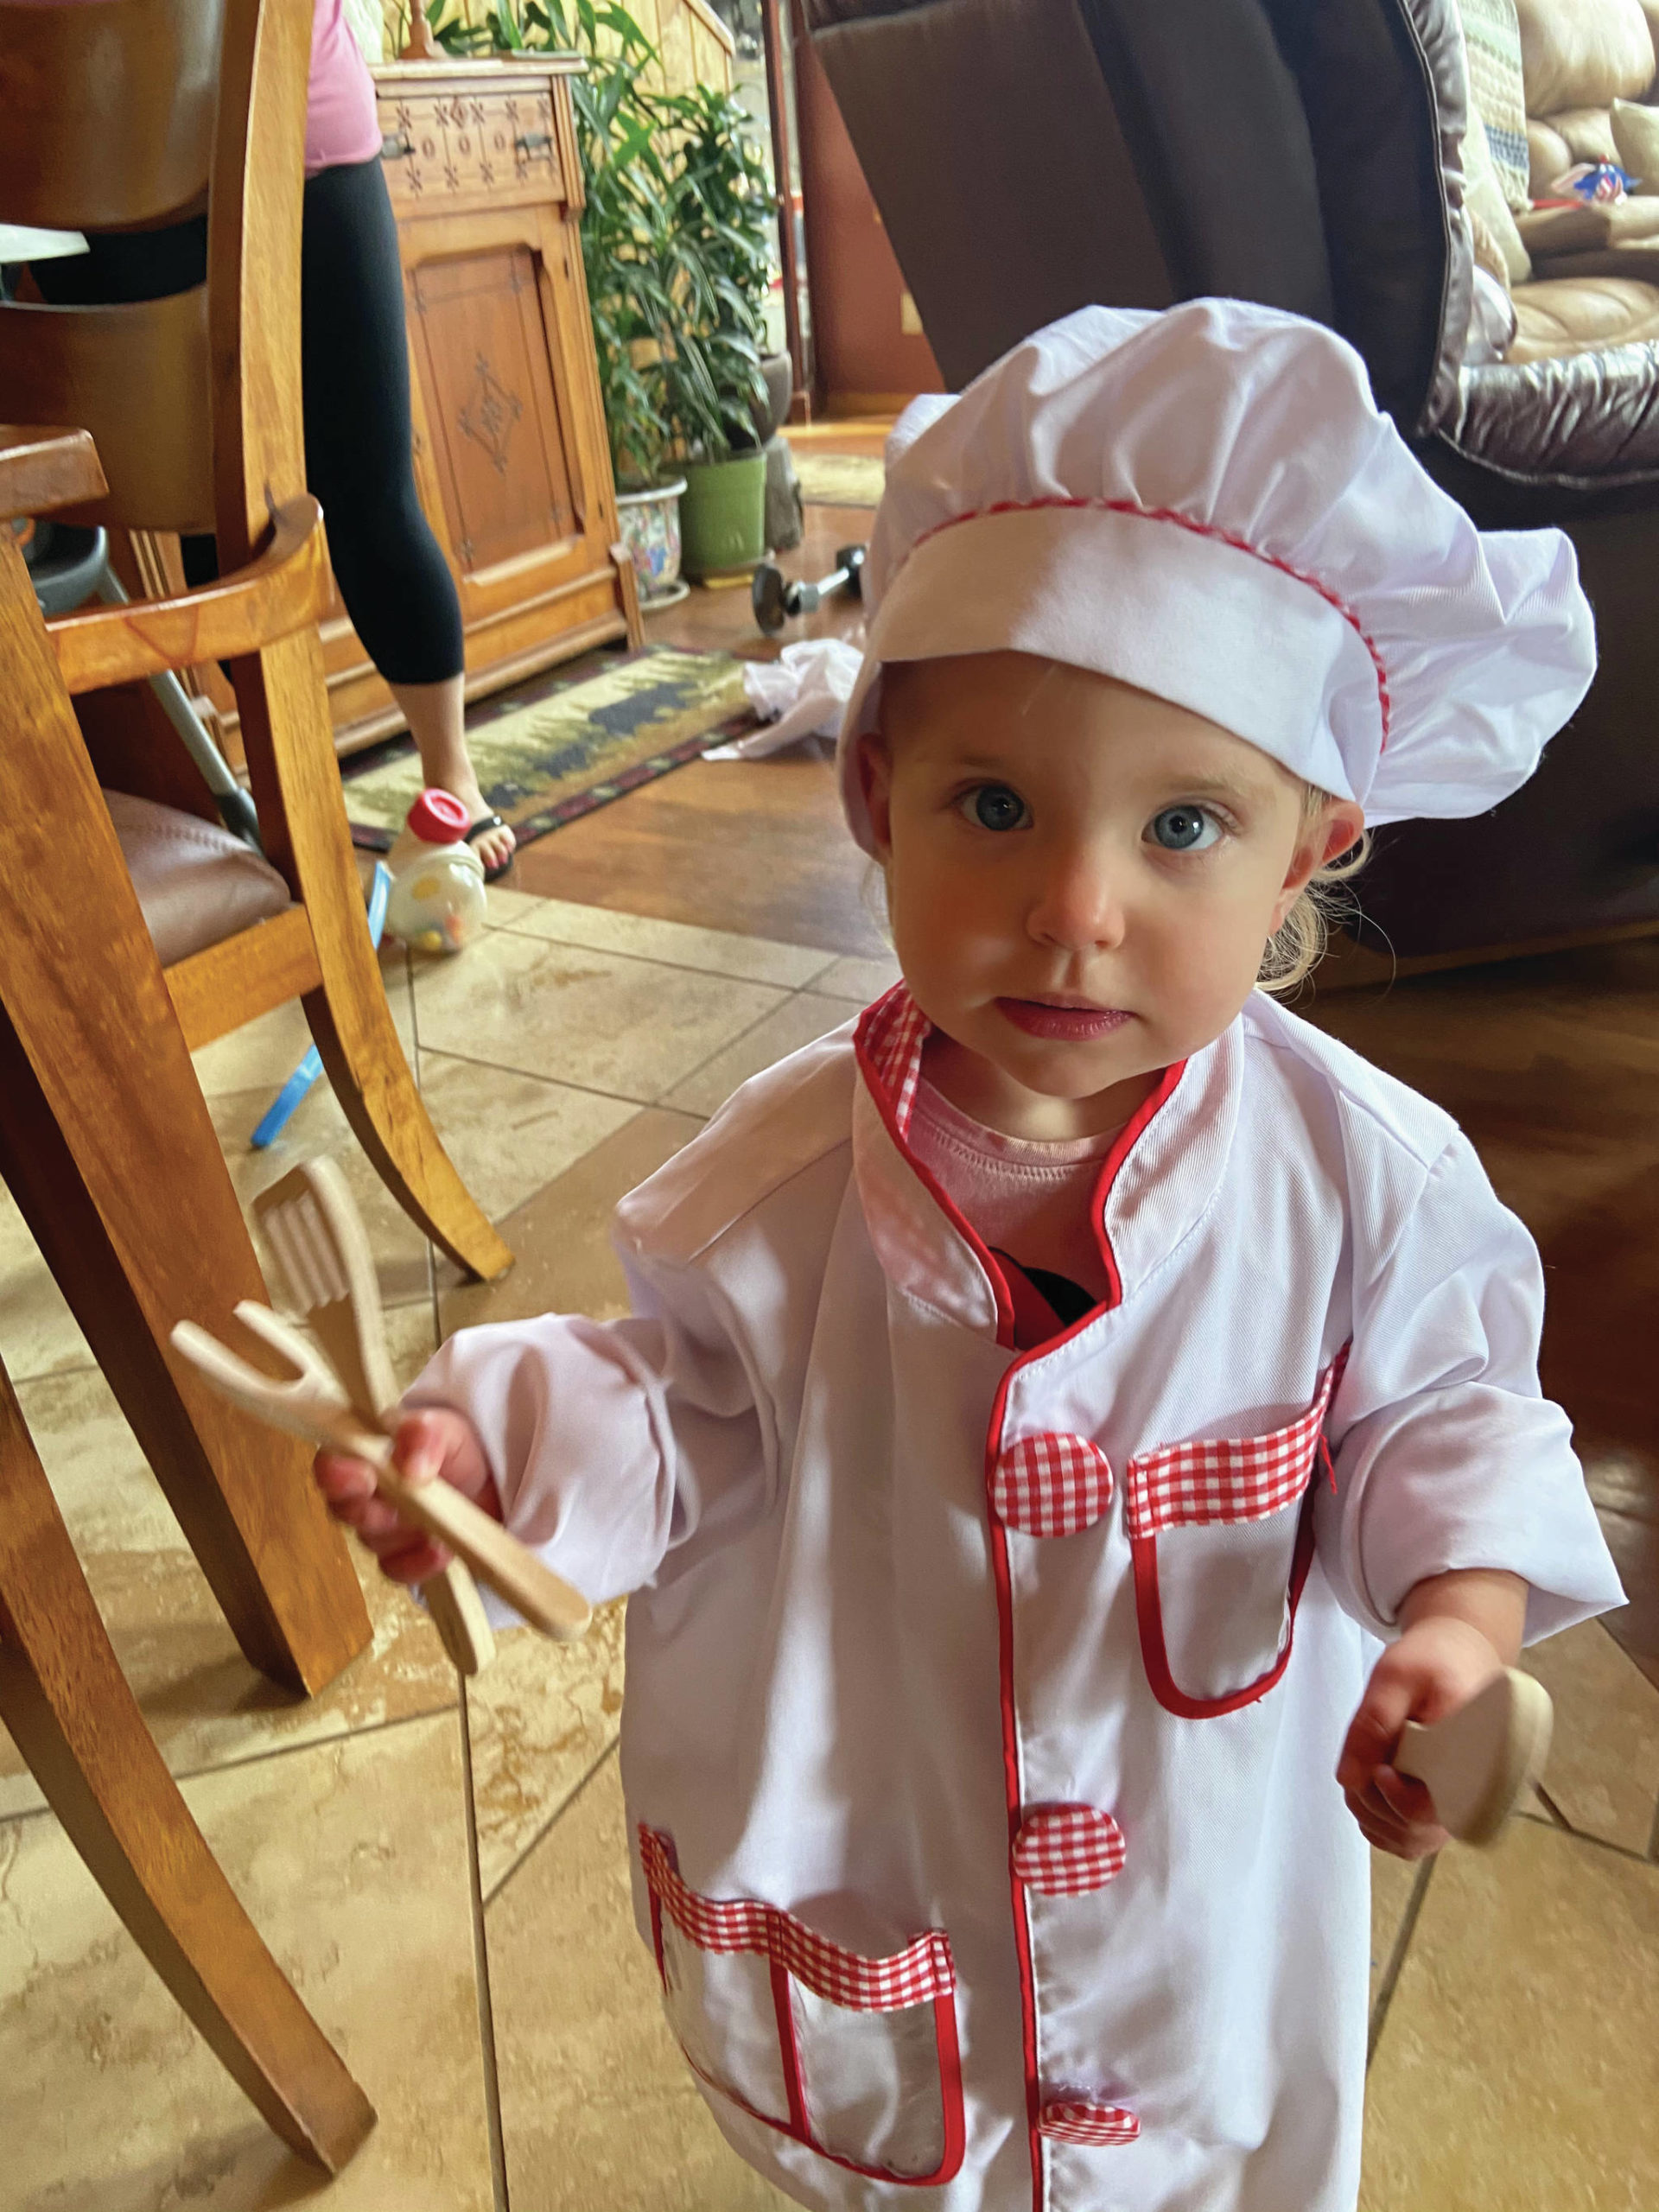 Teri Robl’s grandchild Ryan stands ready to assist on Saturday, July 11, 2020, in Robl’s Homer, Alaska, kitchen. (Photo by Teri Robl)